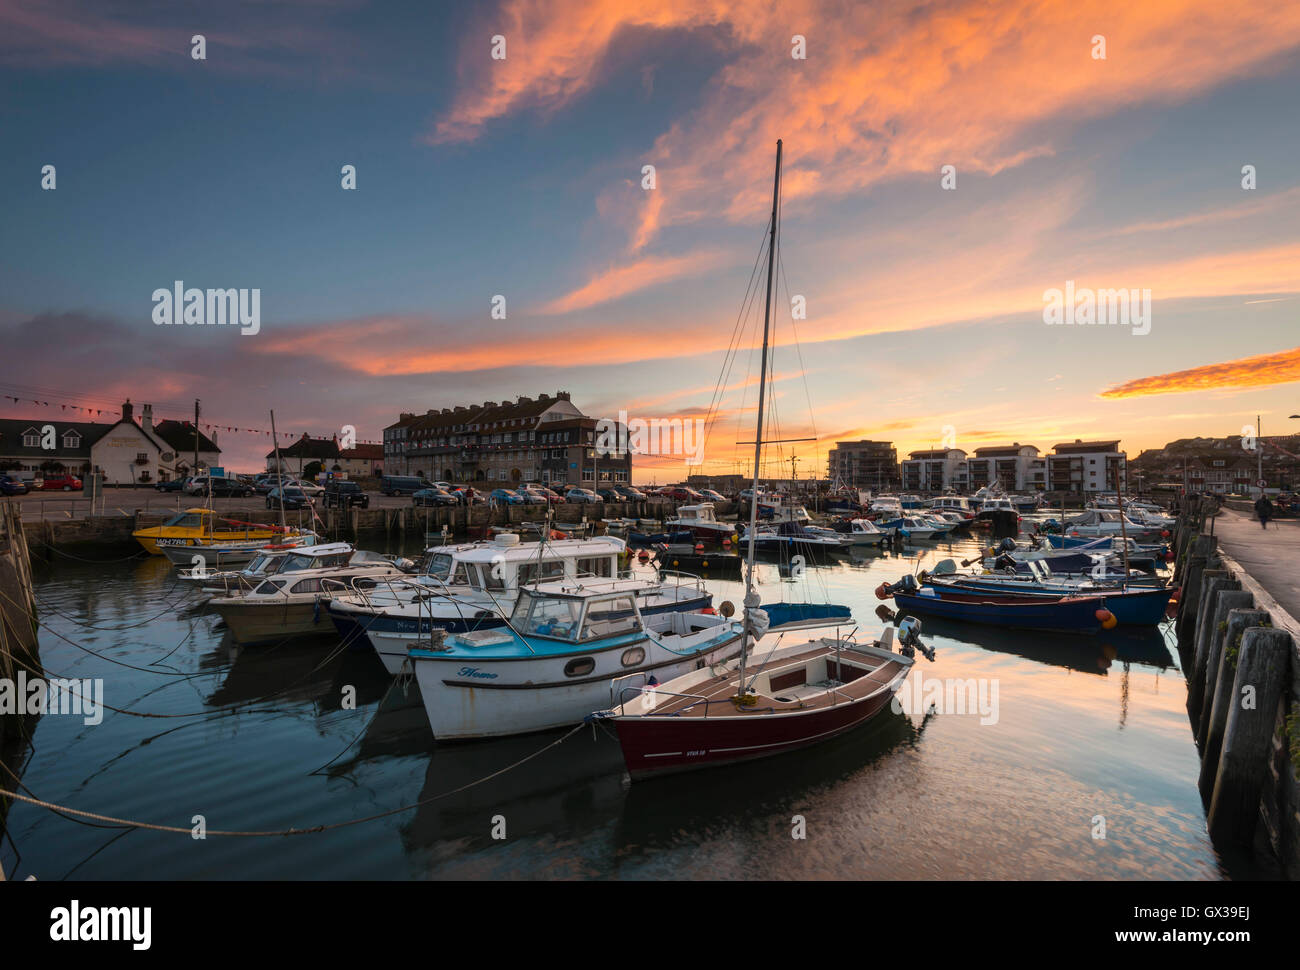 West Bay, Dorset, UK - 14th September 2016. UK Weather.  A glorious sunset illuminating the clouds above West Bay Harbour in Dorset, UK.  West Bay is one of the locations for the hit ITV series Broadchurch.  Picture: Graham Hunt/Alamy Live News Stock Photo